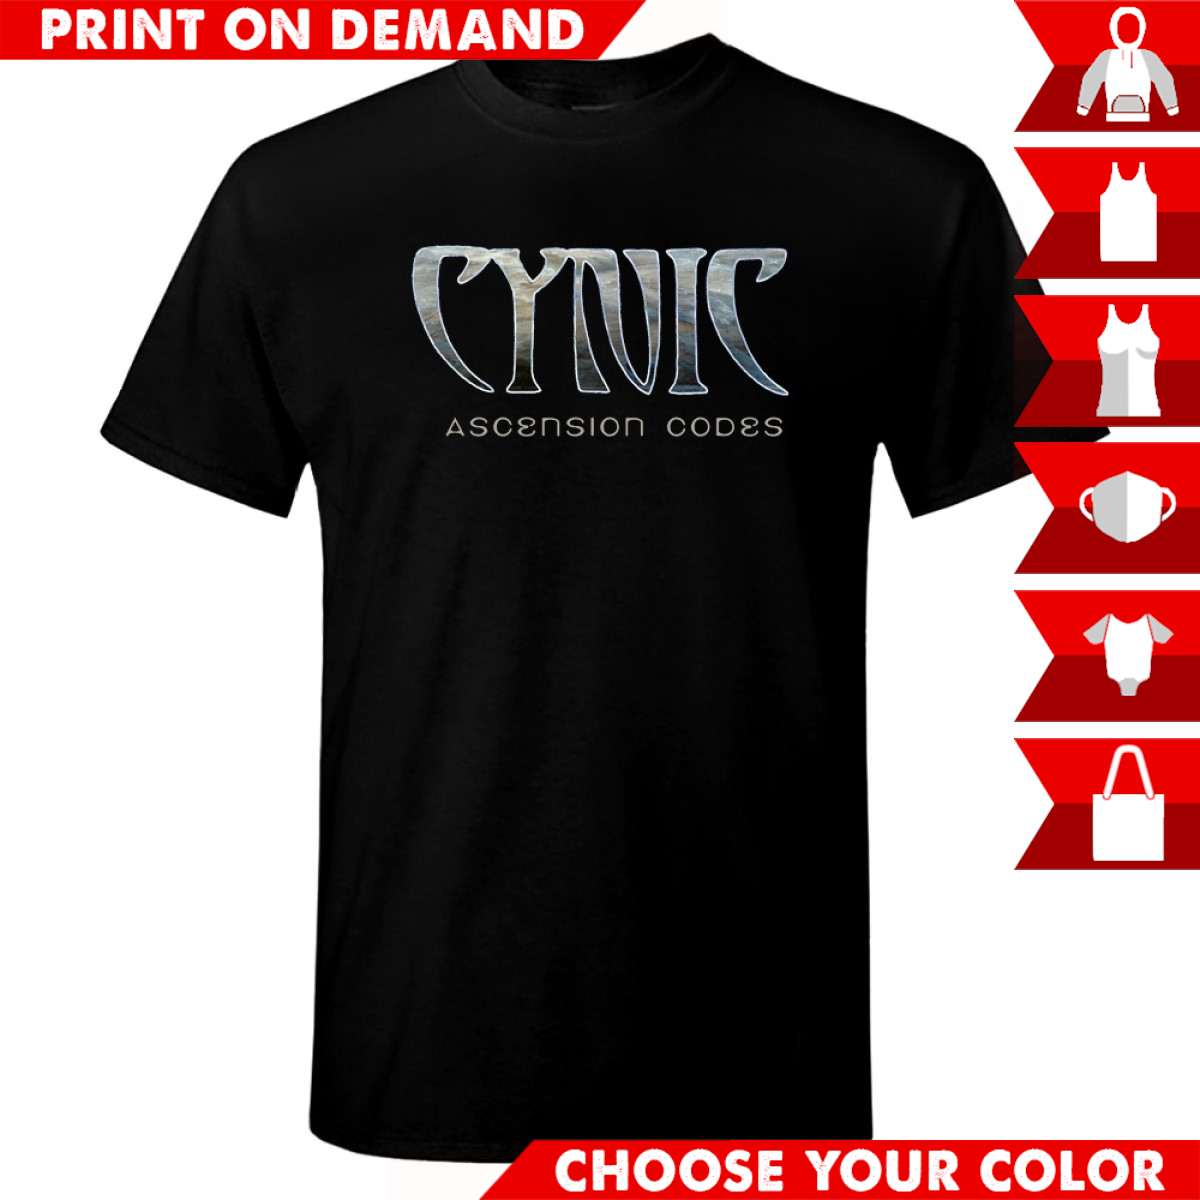 Cynic - Ascension Codes - Print on demand